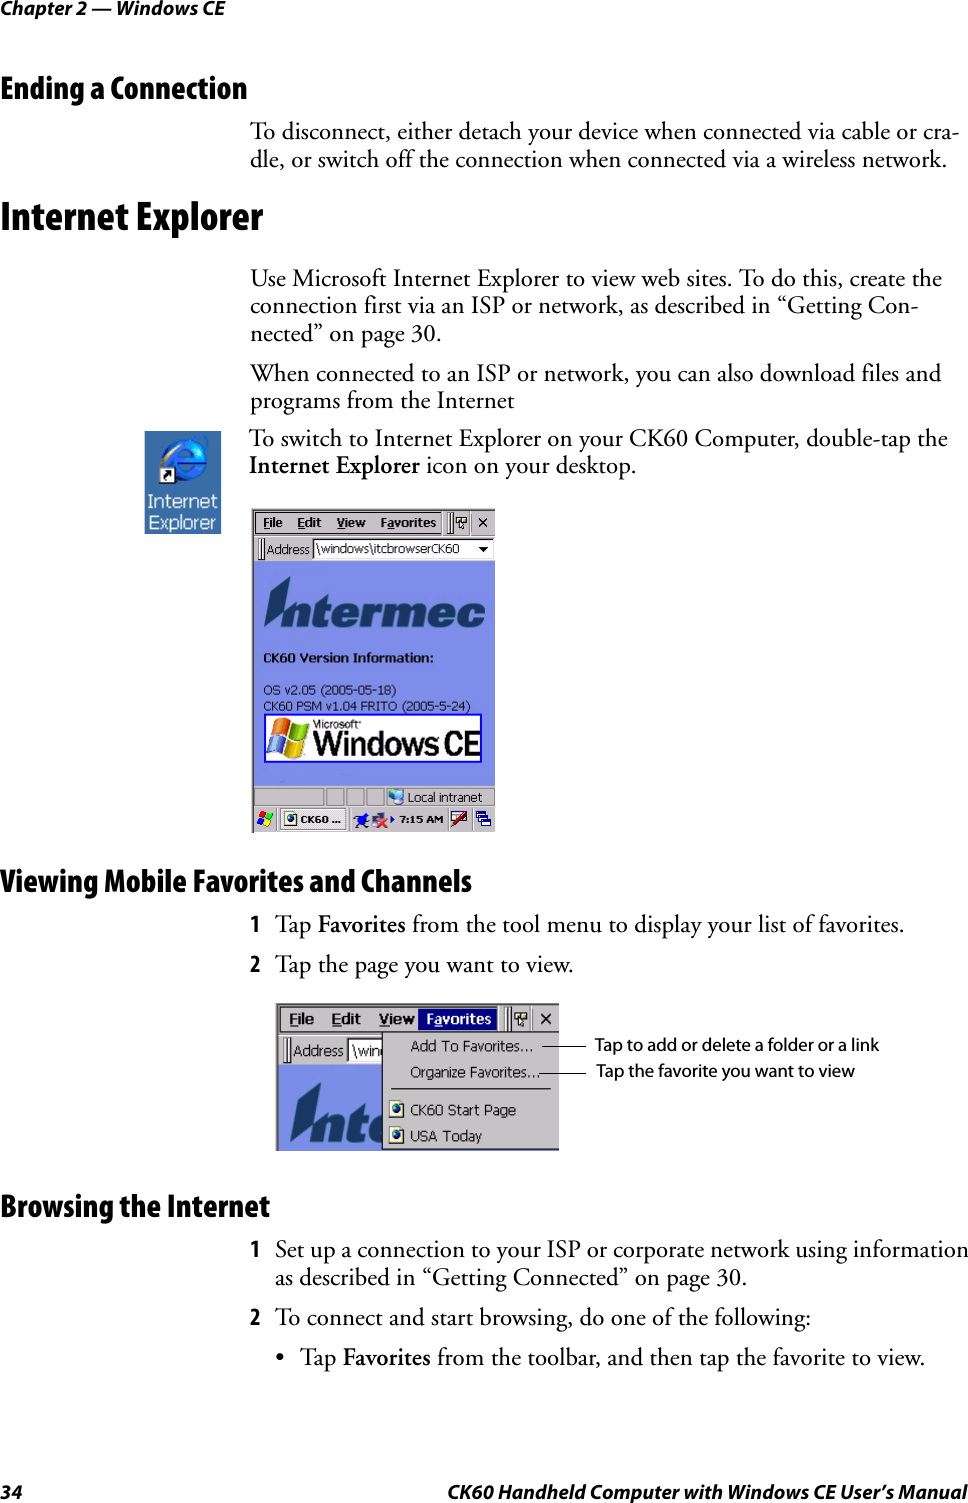 Chapter 2 — Windows CE34 CK60 Handheld Computer with Windows CE User’s ManualEnding a ConnectionTo disconnect, either detach your device when connected via cable or cra-dle, or switch off the connection when connected via a wireless network.Internet ExplorerUse Microsoft Internet Explorer to view web sites. To do this, create the connection first via an ISP or network, as described in “Getting Con-nected” on page 30.When connected to an ISP or network, you can also download files and programs from the InternetViewing Mobile Favorites and Channels1Tap Favorites from the tool menu to display your list of favorites.2Tap the page you want to view.Browsing the Internet1Set up a connection to your ISP or corporate network using information as described in “Getting Connected” on page 30.2To connect and start browsing, do one of the following:•Tap Favorites from the toolbar, and then tap the favorite to view.To switch to Internet Explorer on your CK60 Computer, double-tap the Internet Explorer icon on your desktop.Tap to add or delete a folder or a linkTap the favorite you want to view